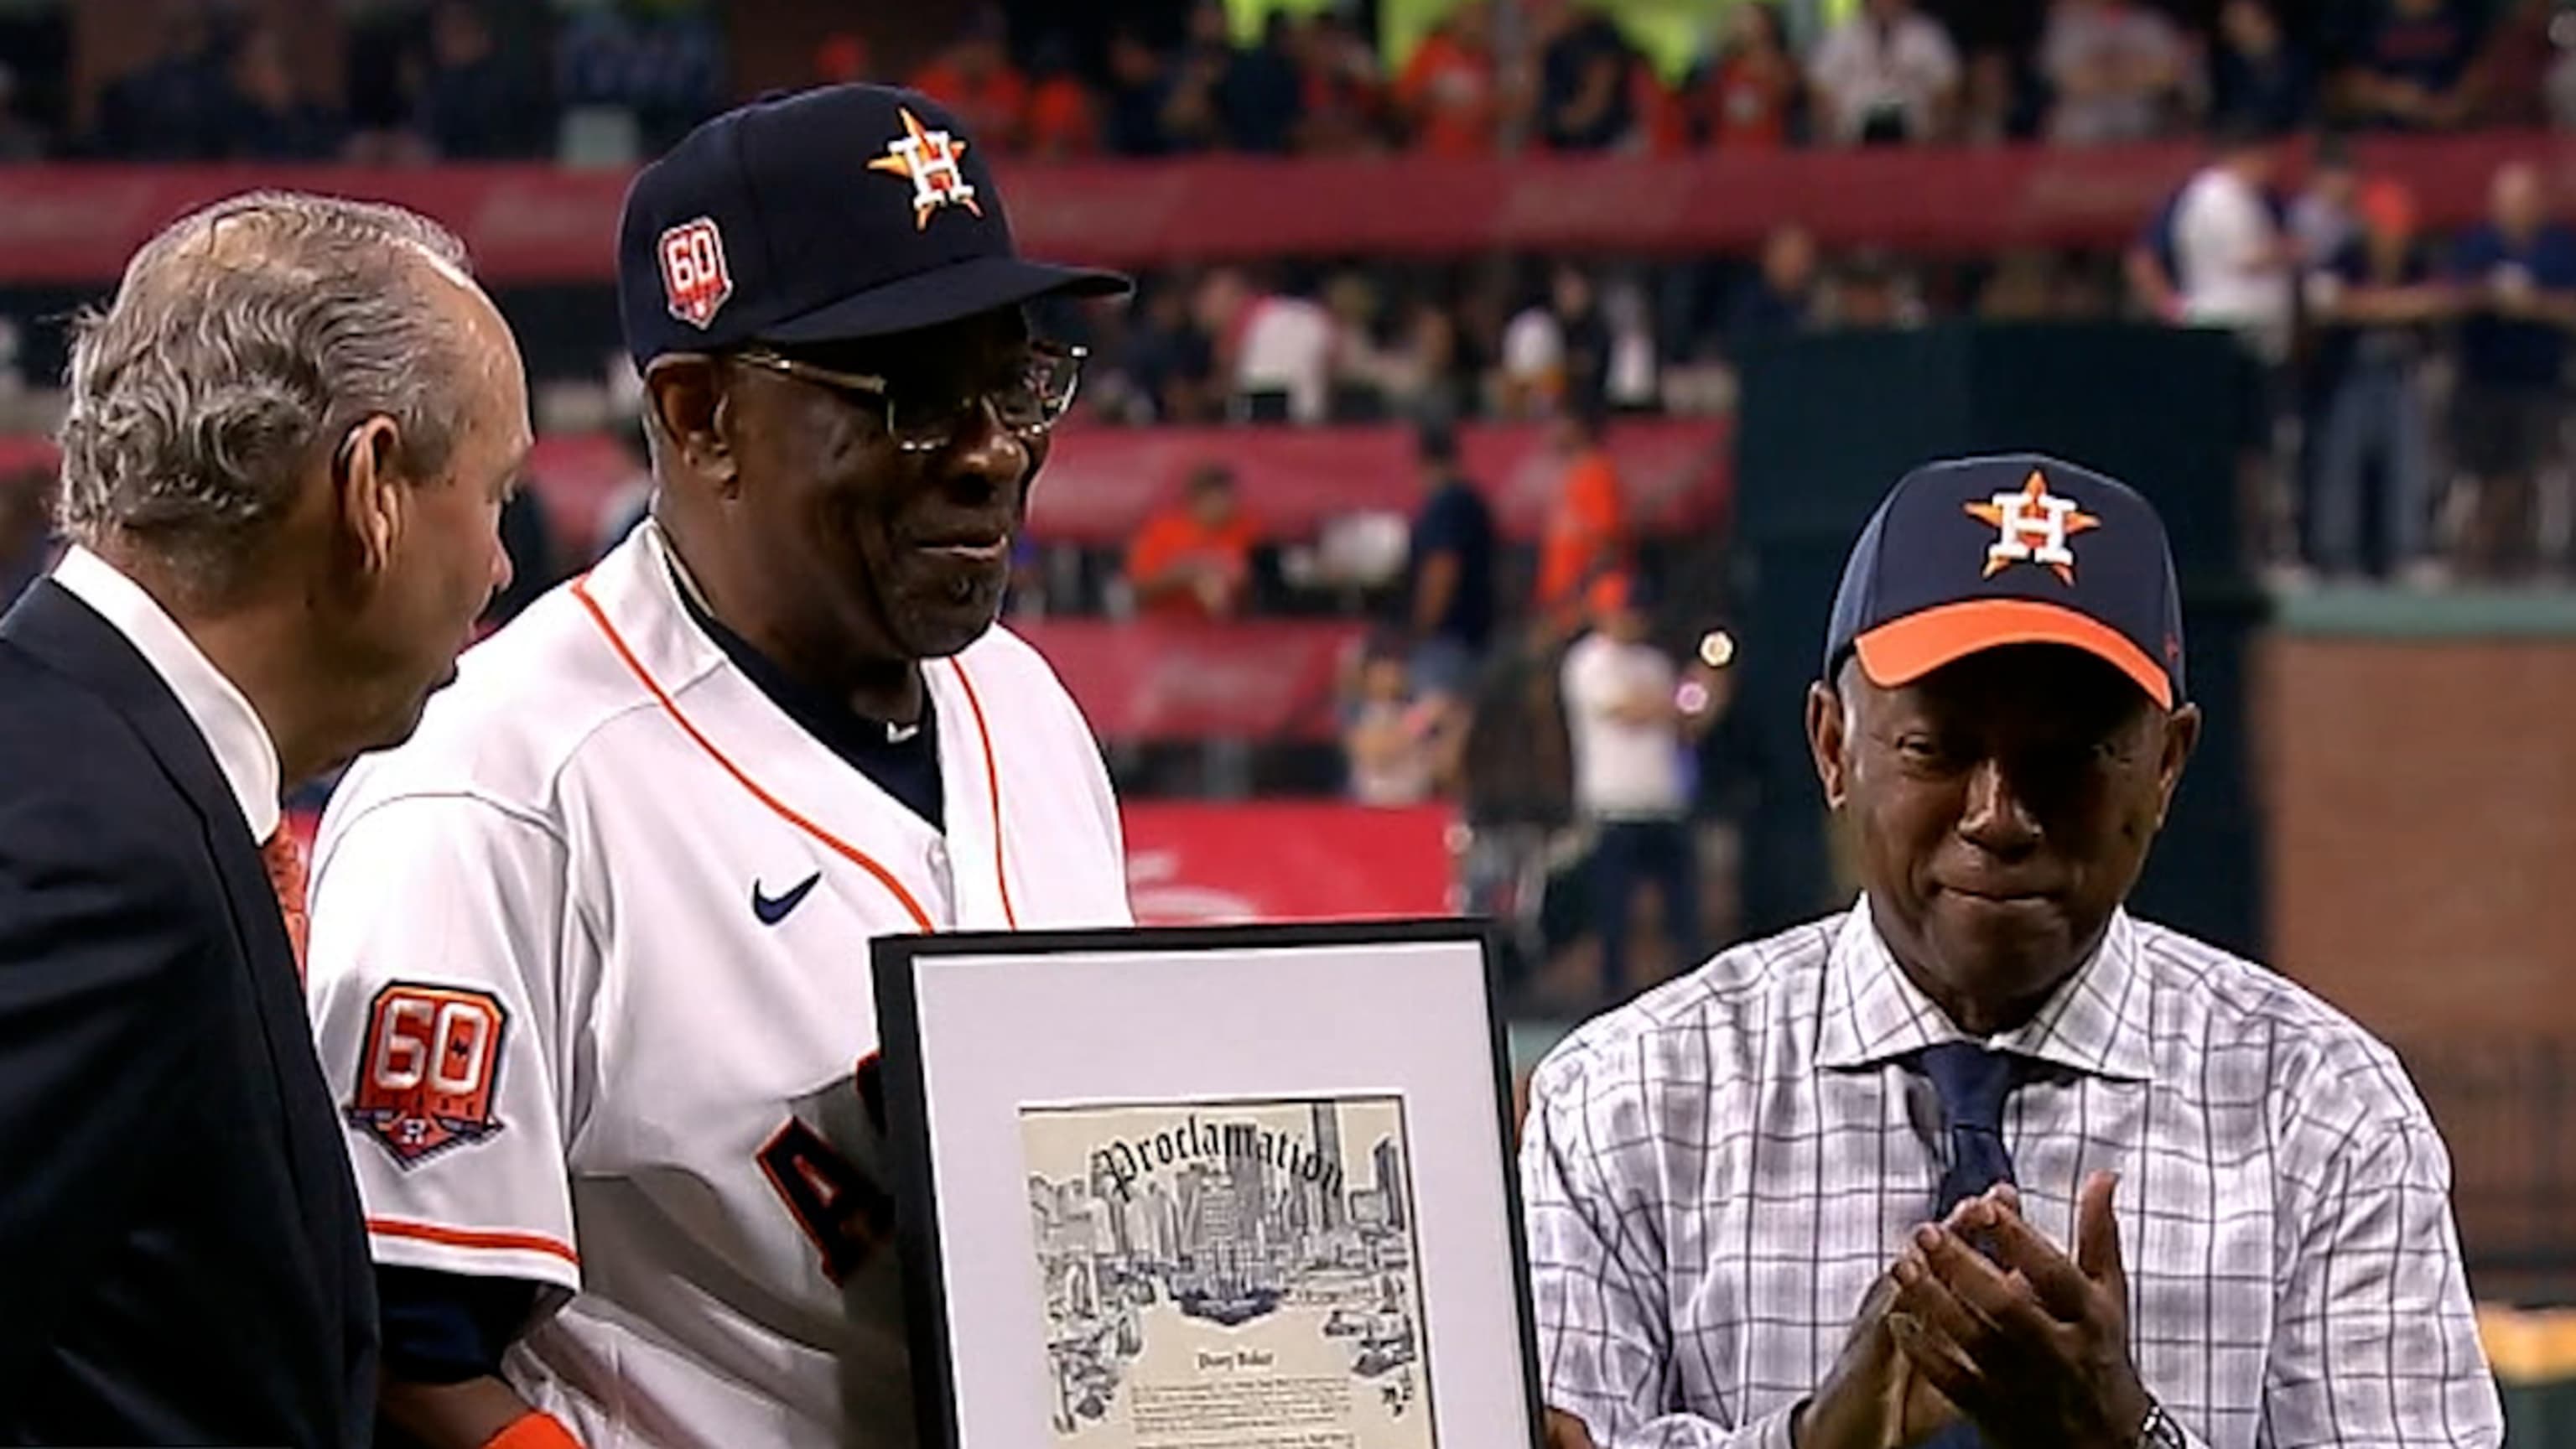 Dusty Baker Believes His Astros Could Keep World Championship